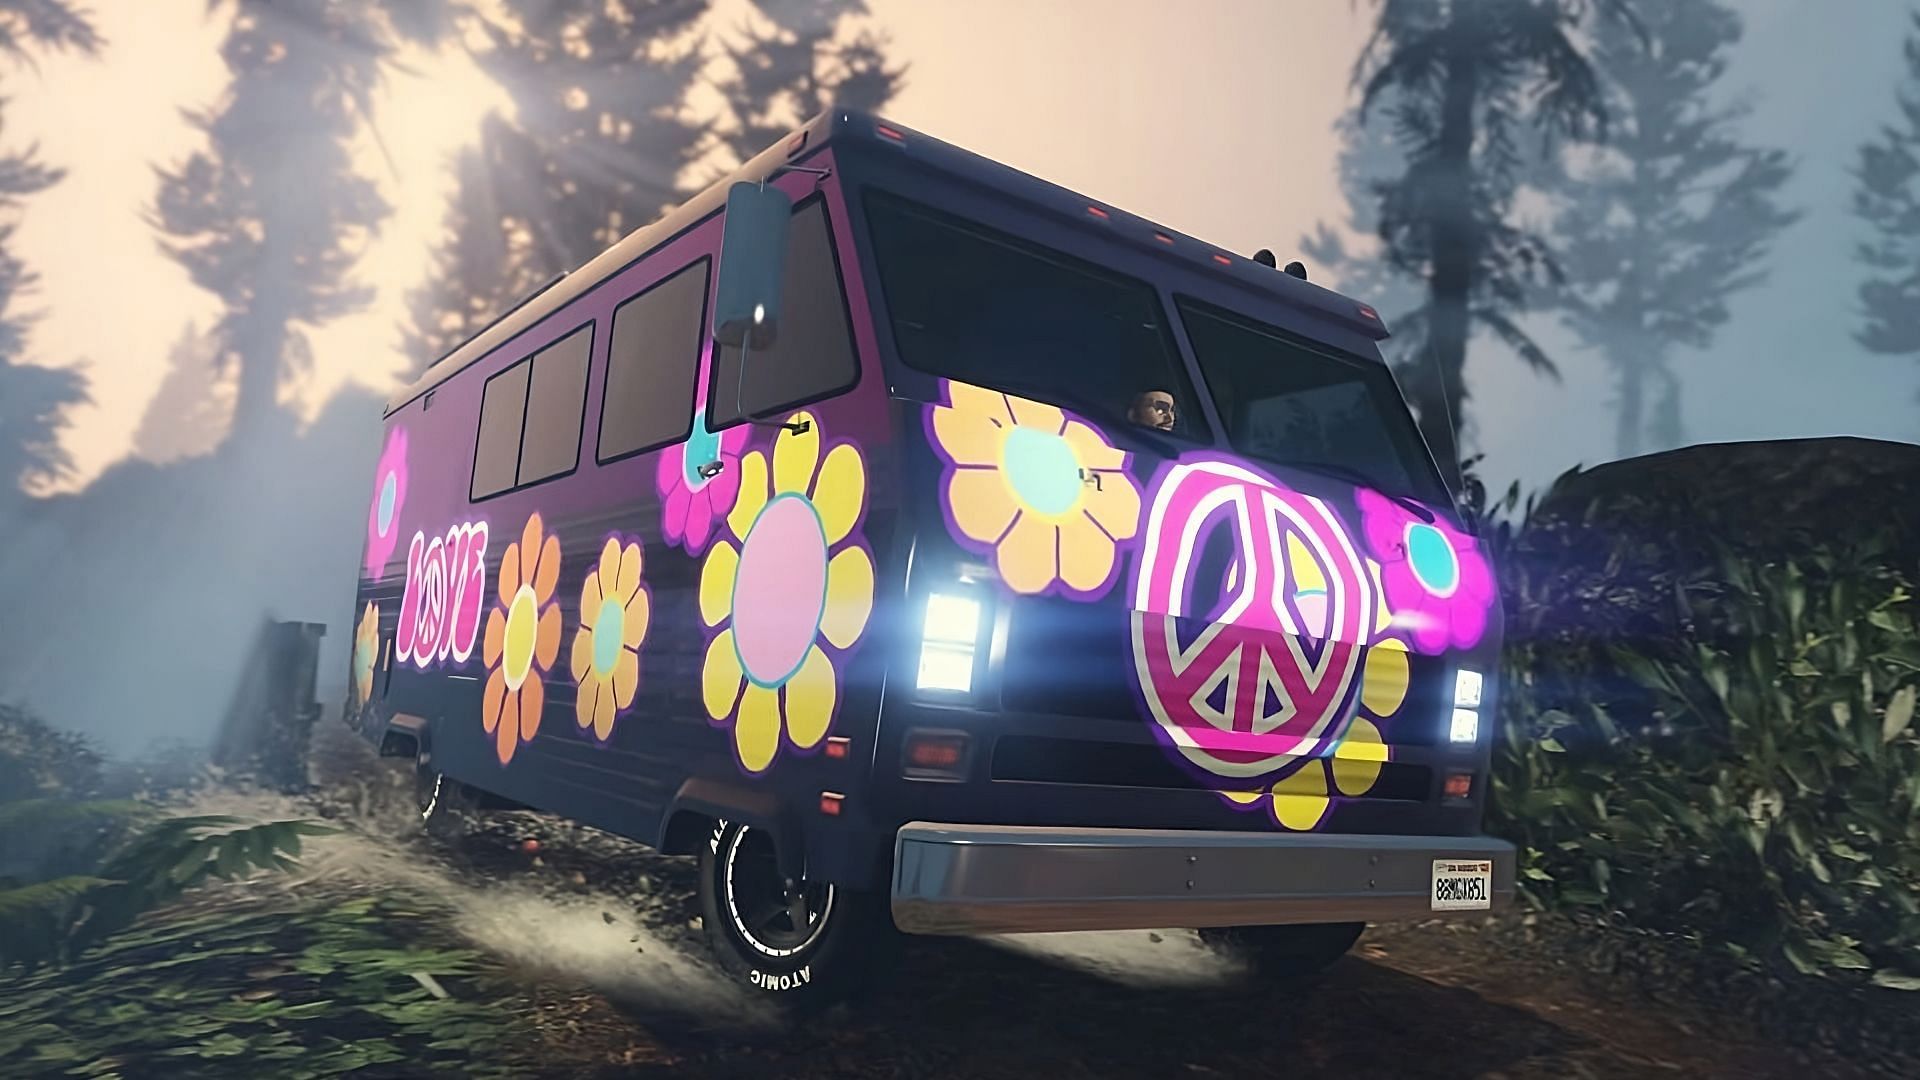 The Journey II is one of the new Los Santos Drug Wars vehicles to get this feature in GTA Online